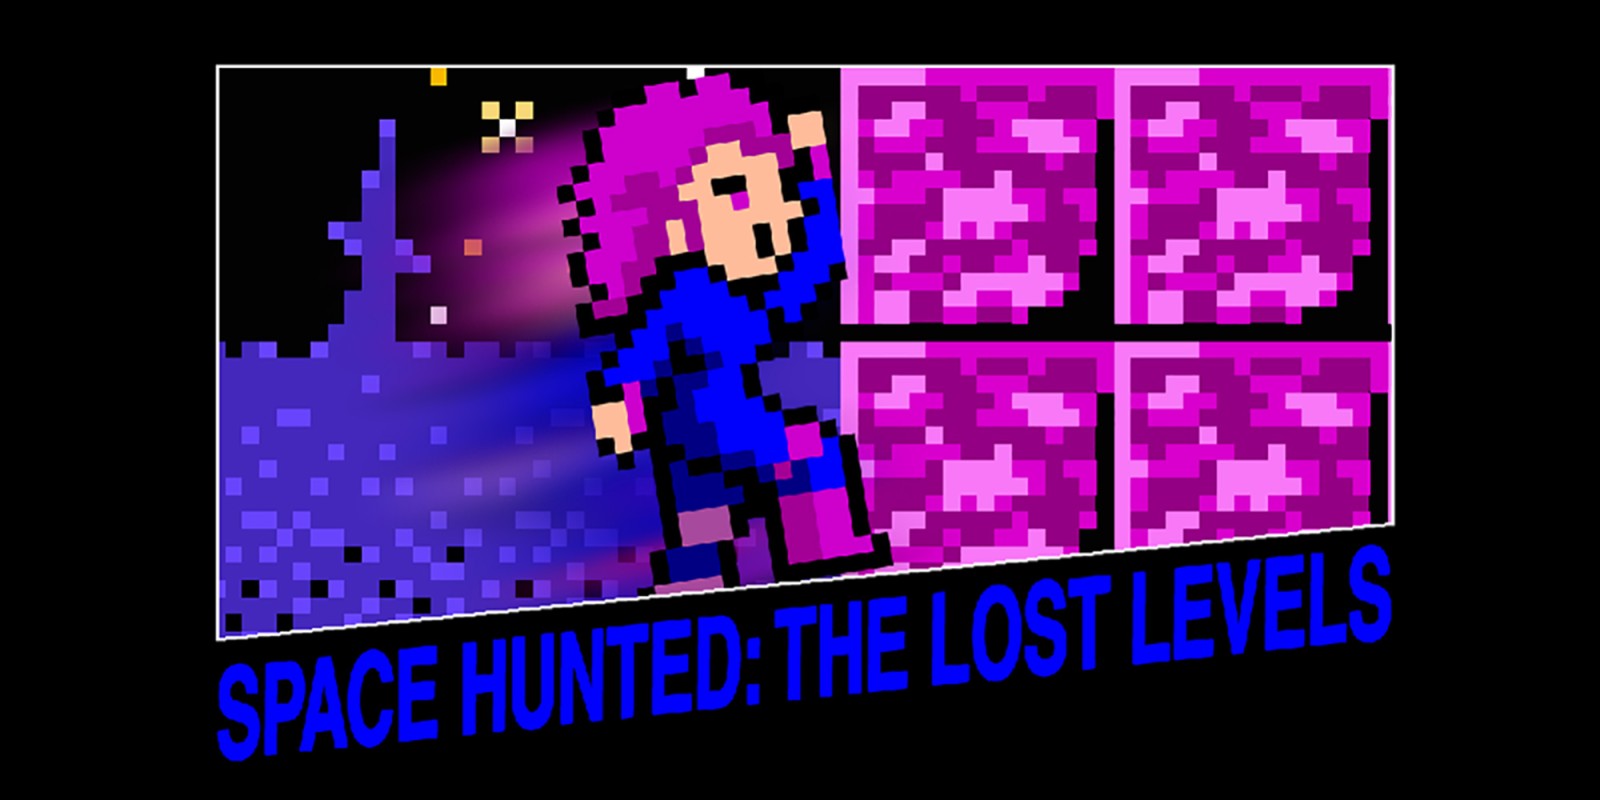 Space Hunted: The Lost Levels